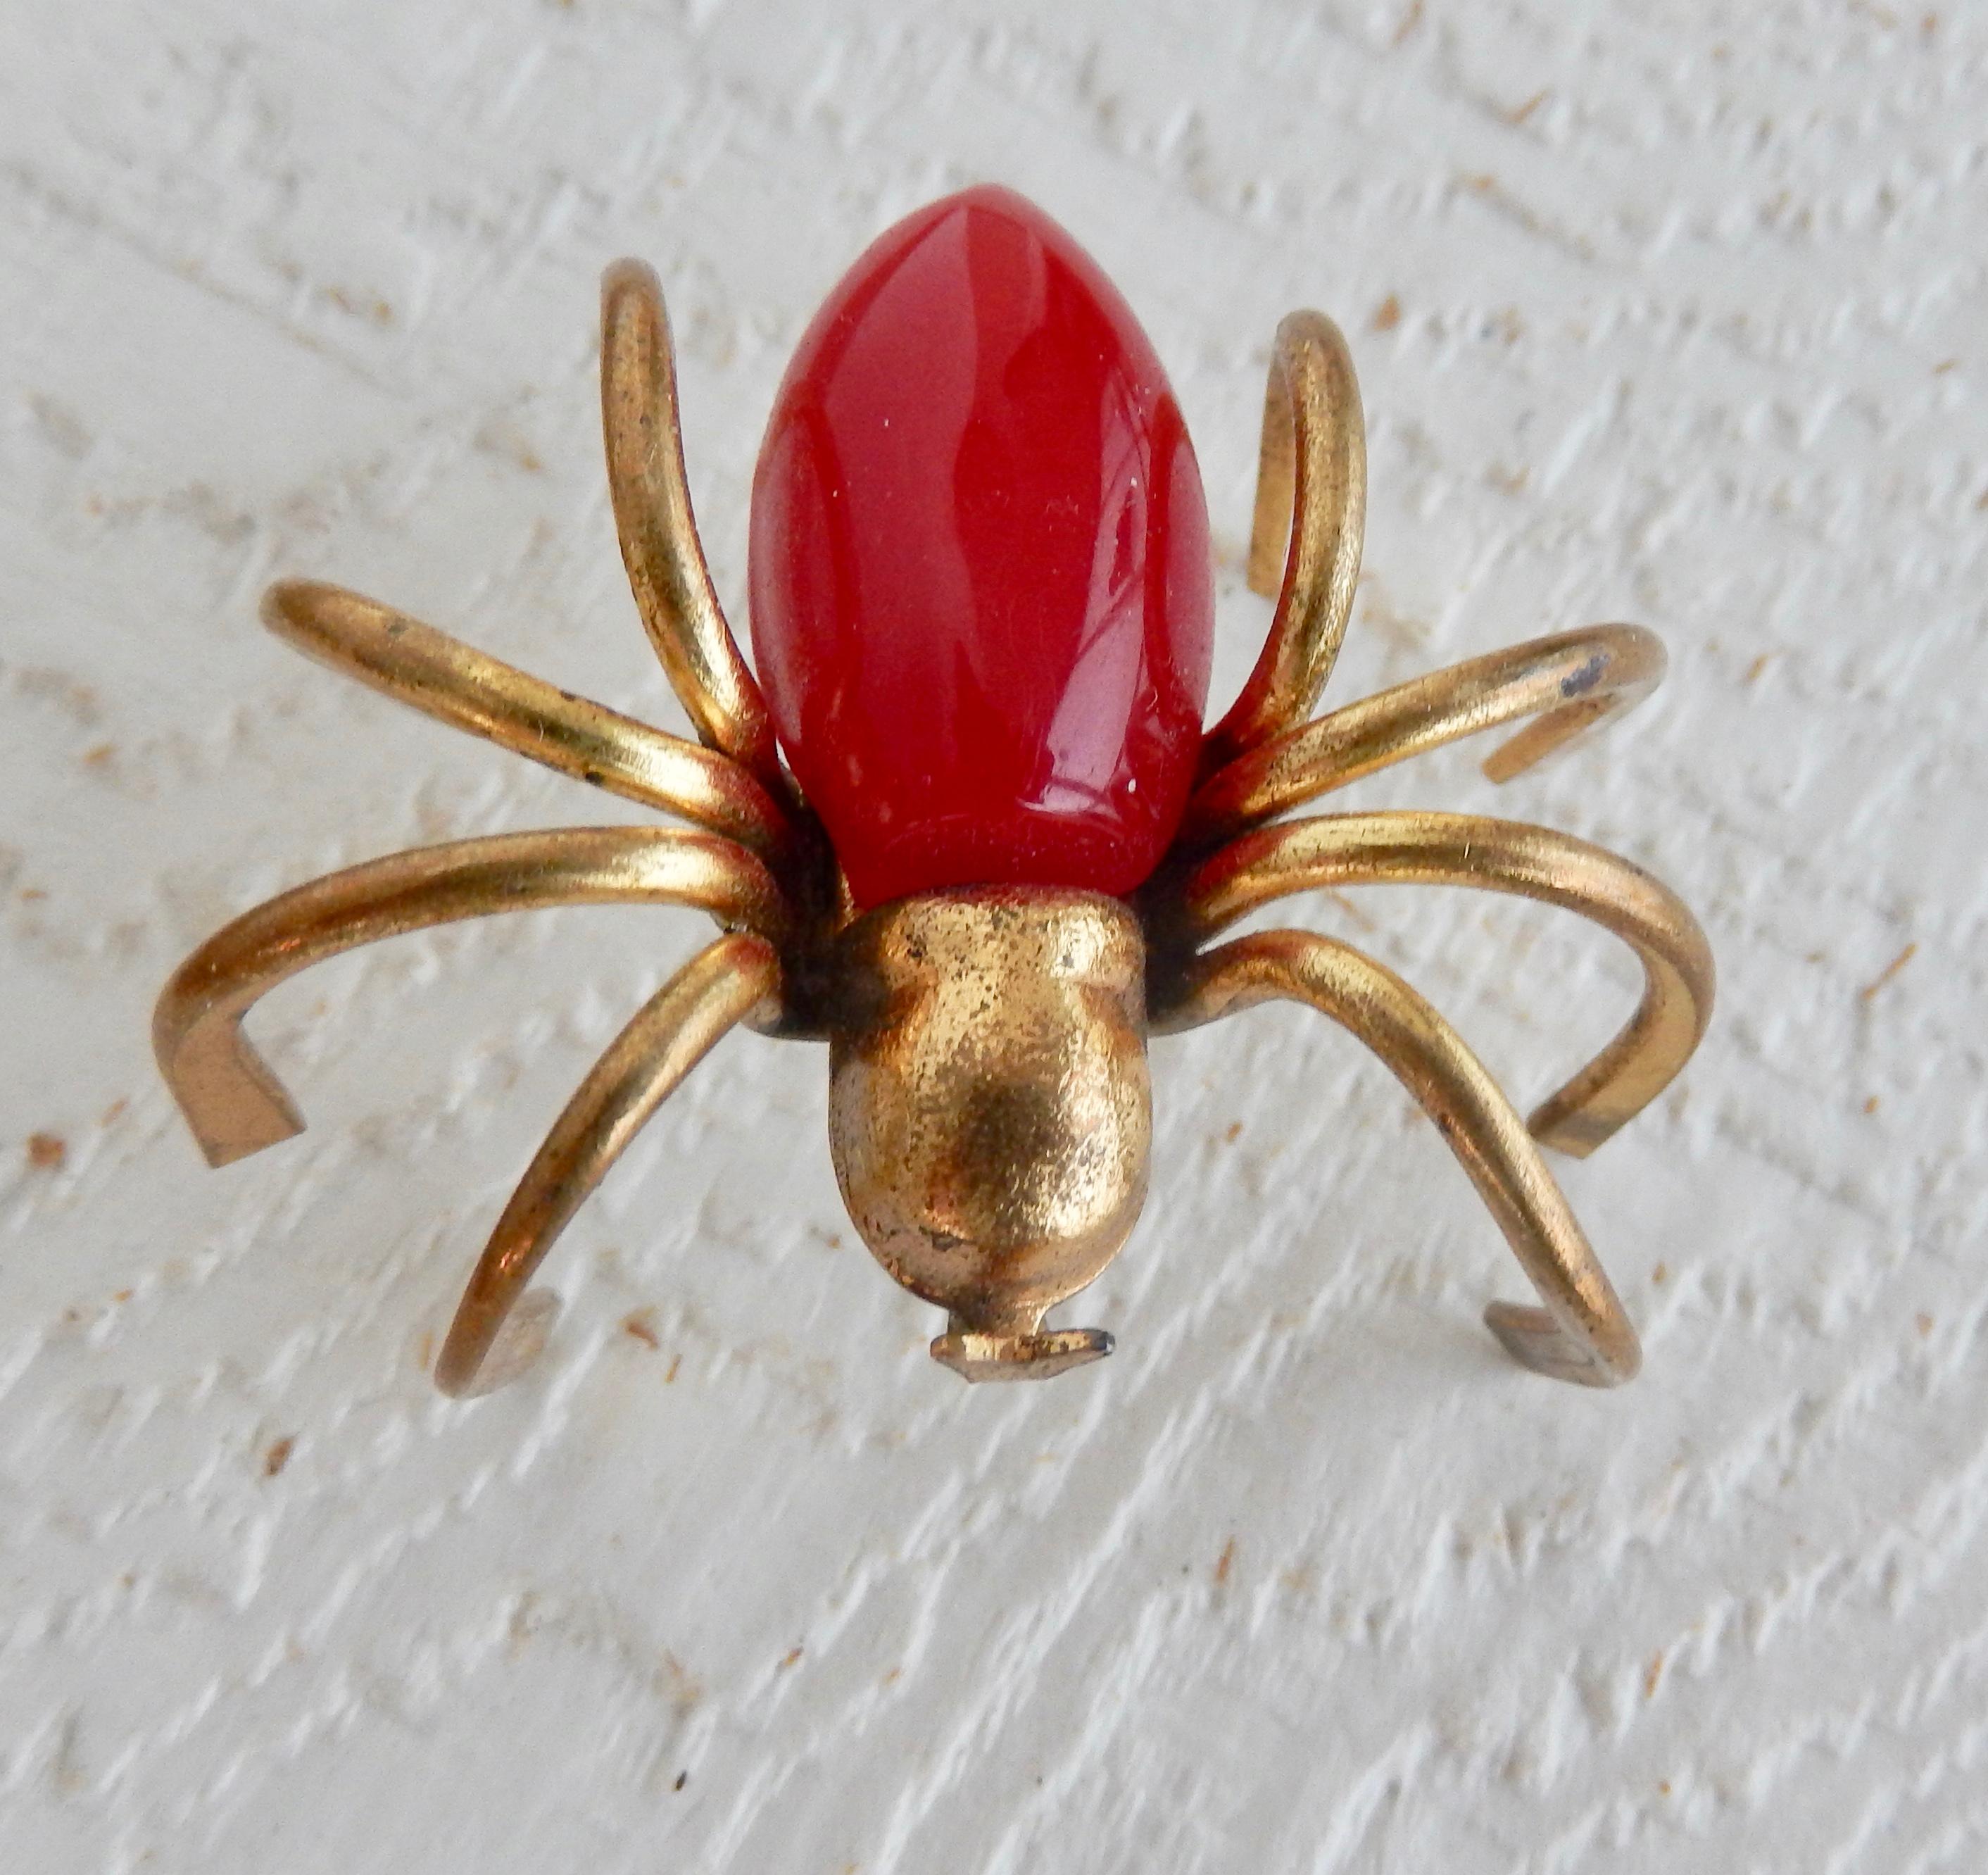 A whimsical three-dimensional gilt metal spider pin with a red bakelite body from the 1940s. In very good condition. A classic, scarce example of American Art Deco costume jewelry. 

A similar brooch, listed separately, is available with orange